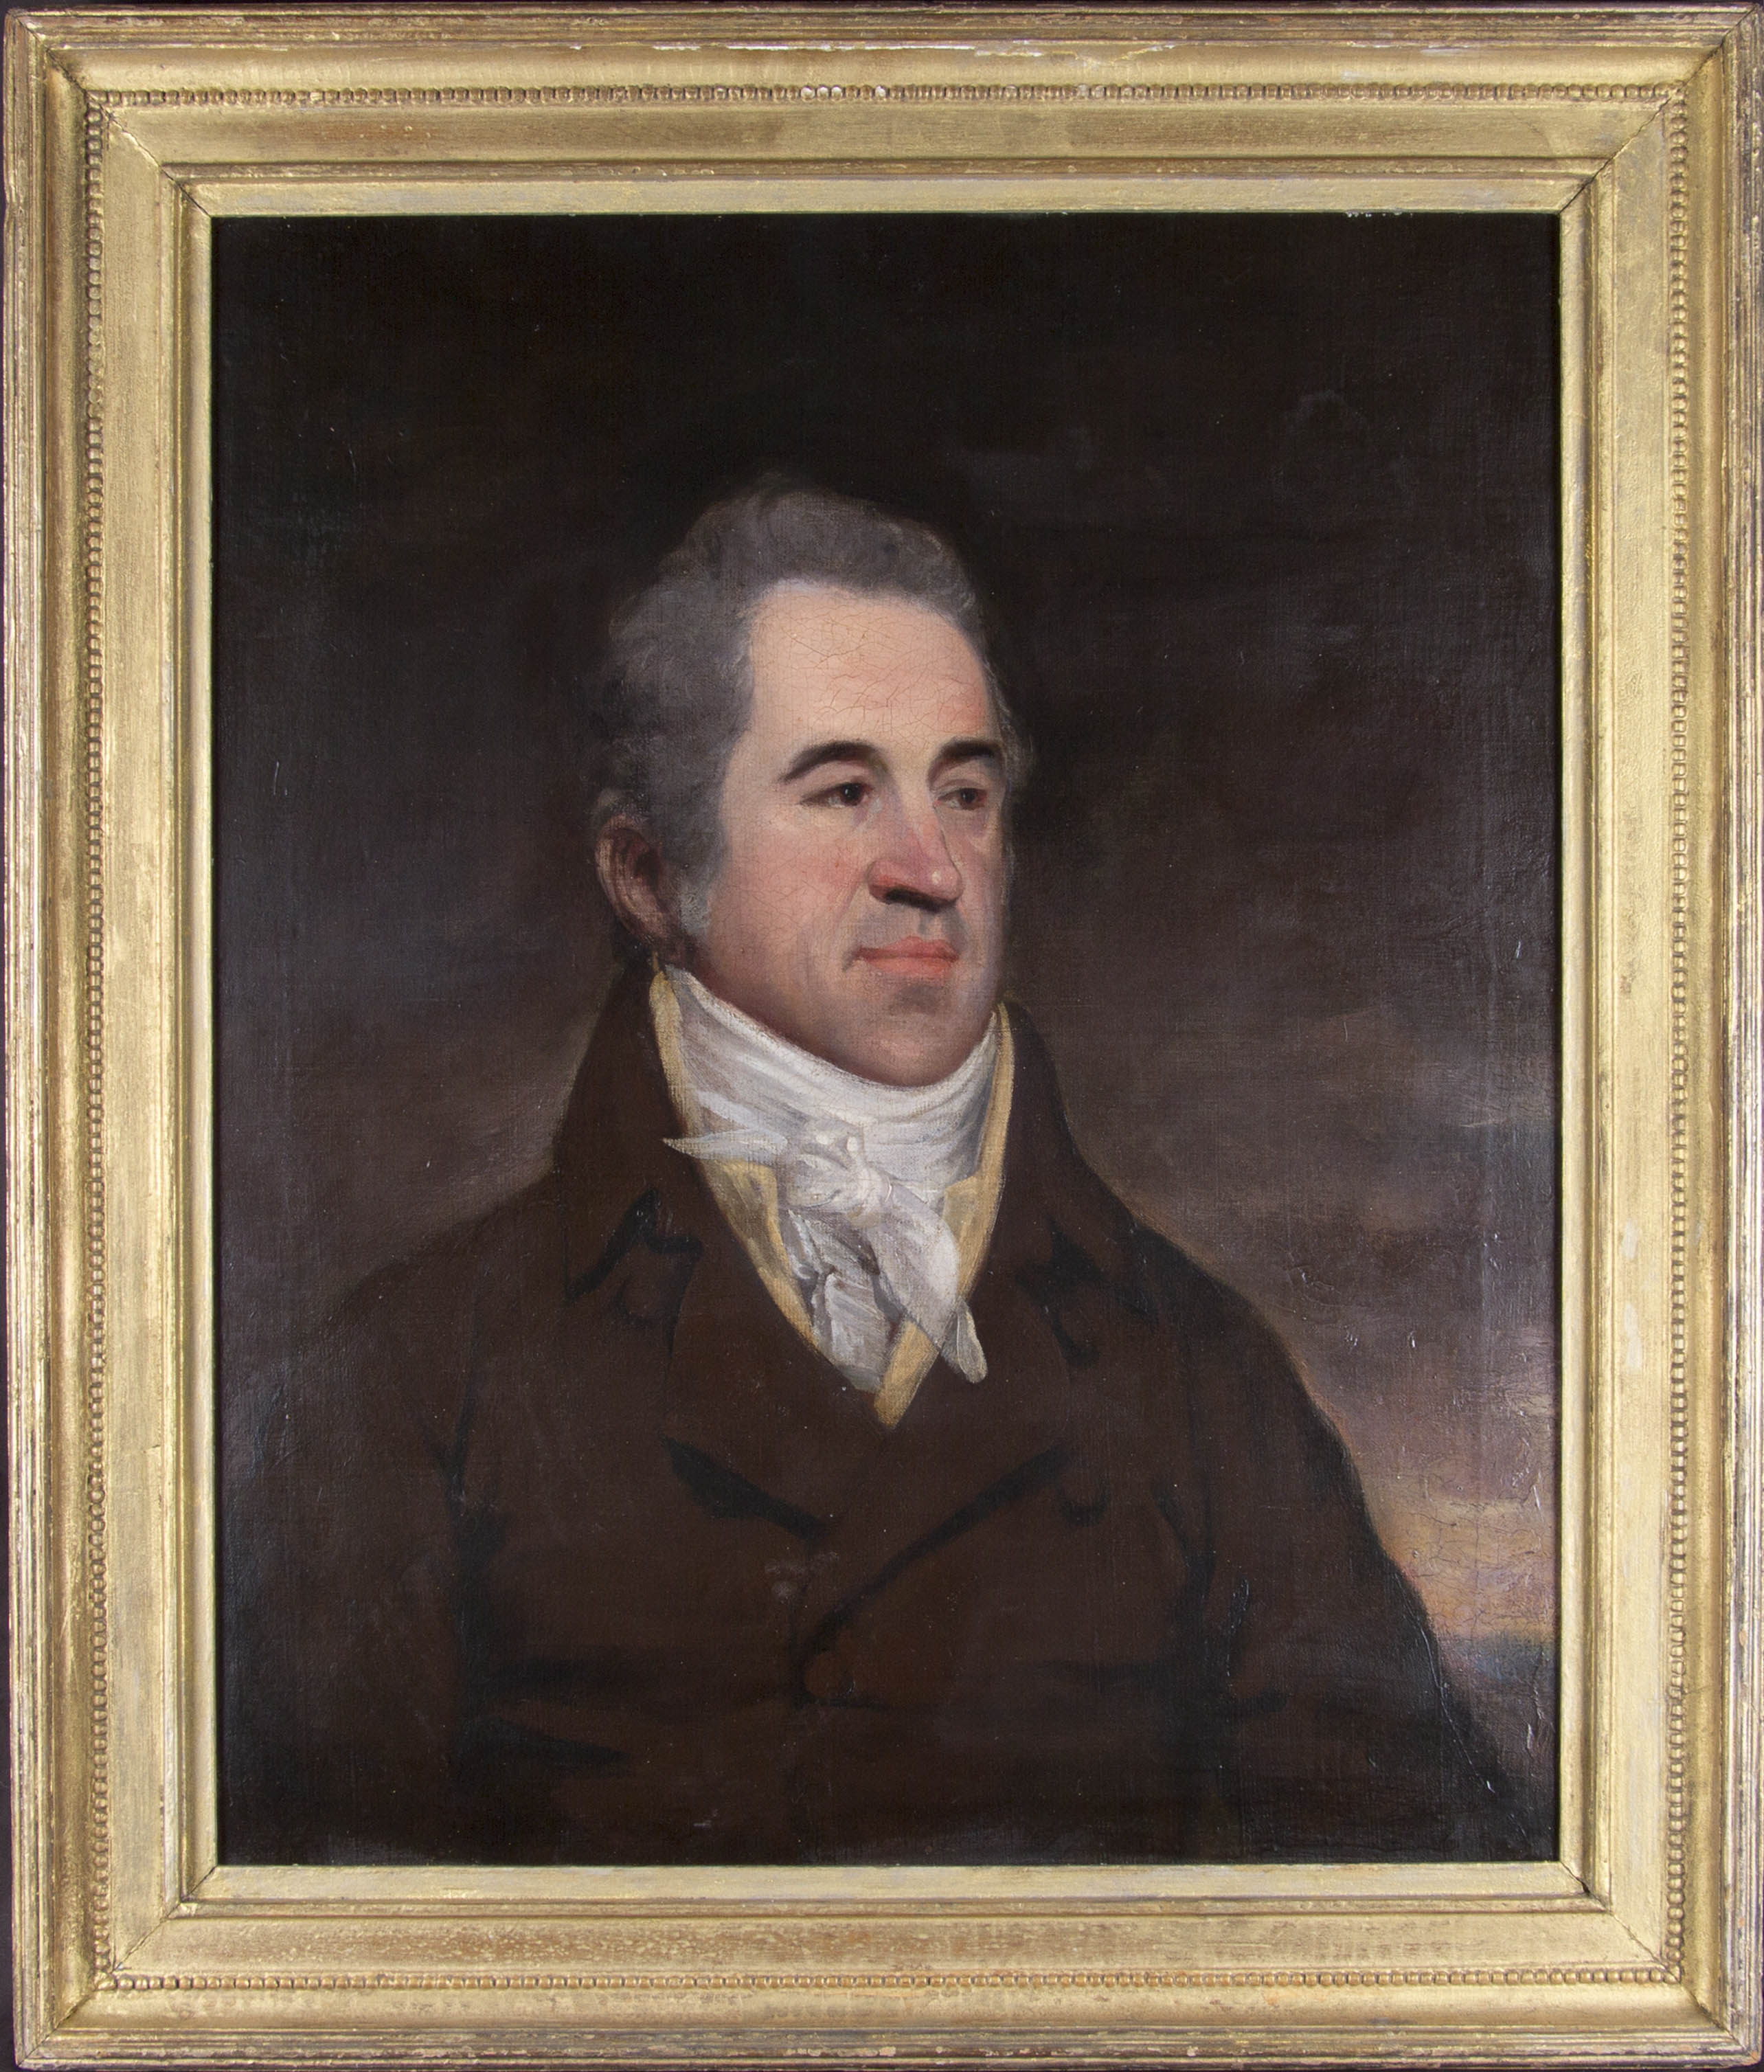 Framed, unsigned, oil on canvas, English School, bust length portrait of a Regency gentleman in - Image 2 of 2